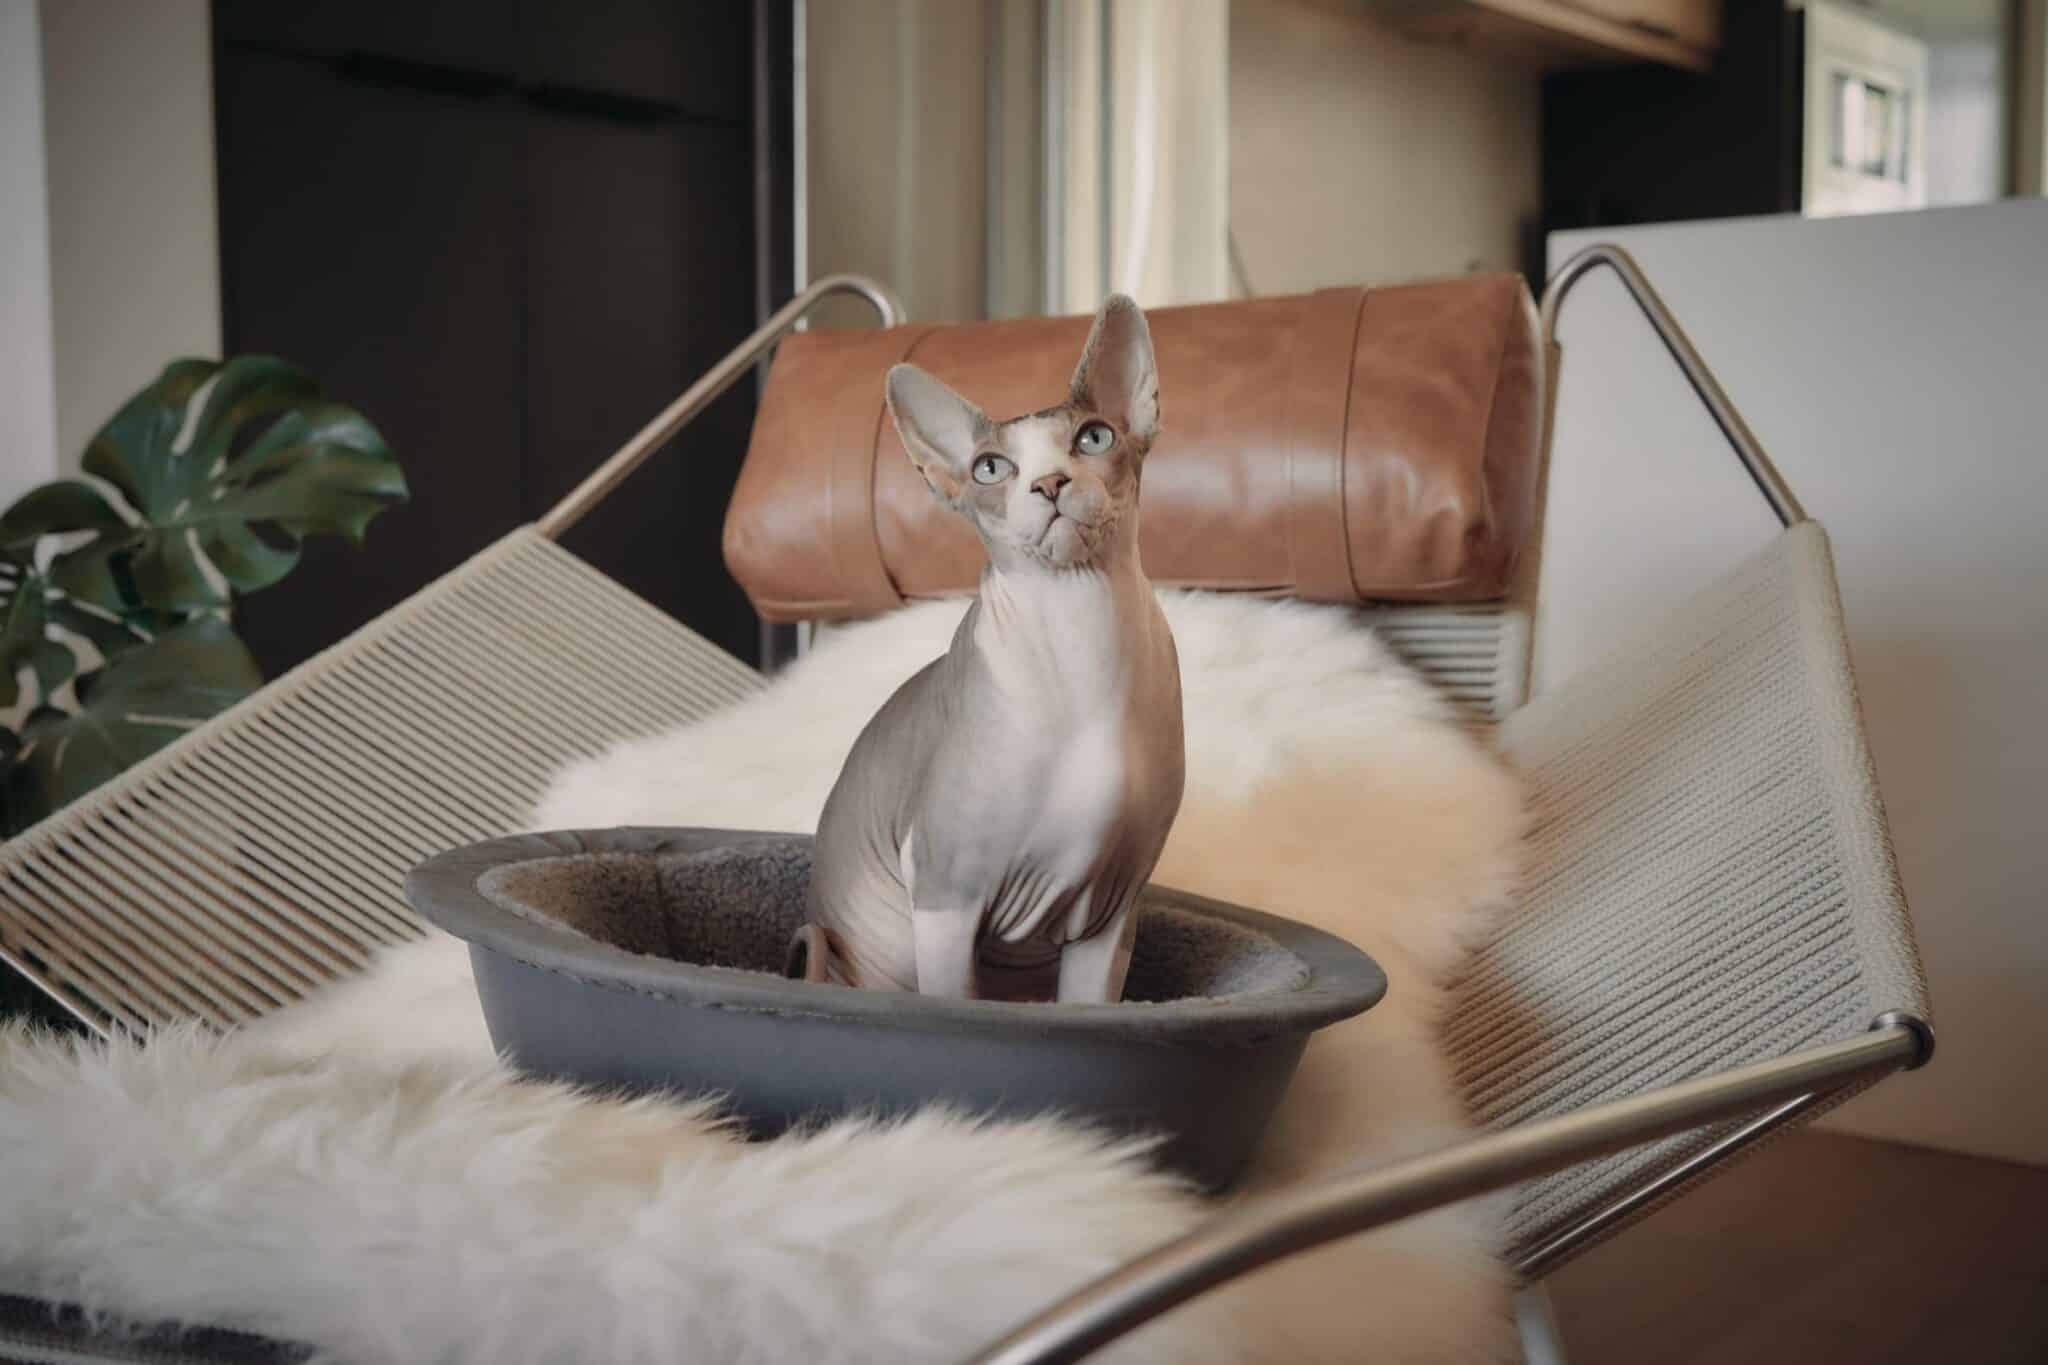 sphynx cat on hepper nest bed on chair